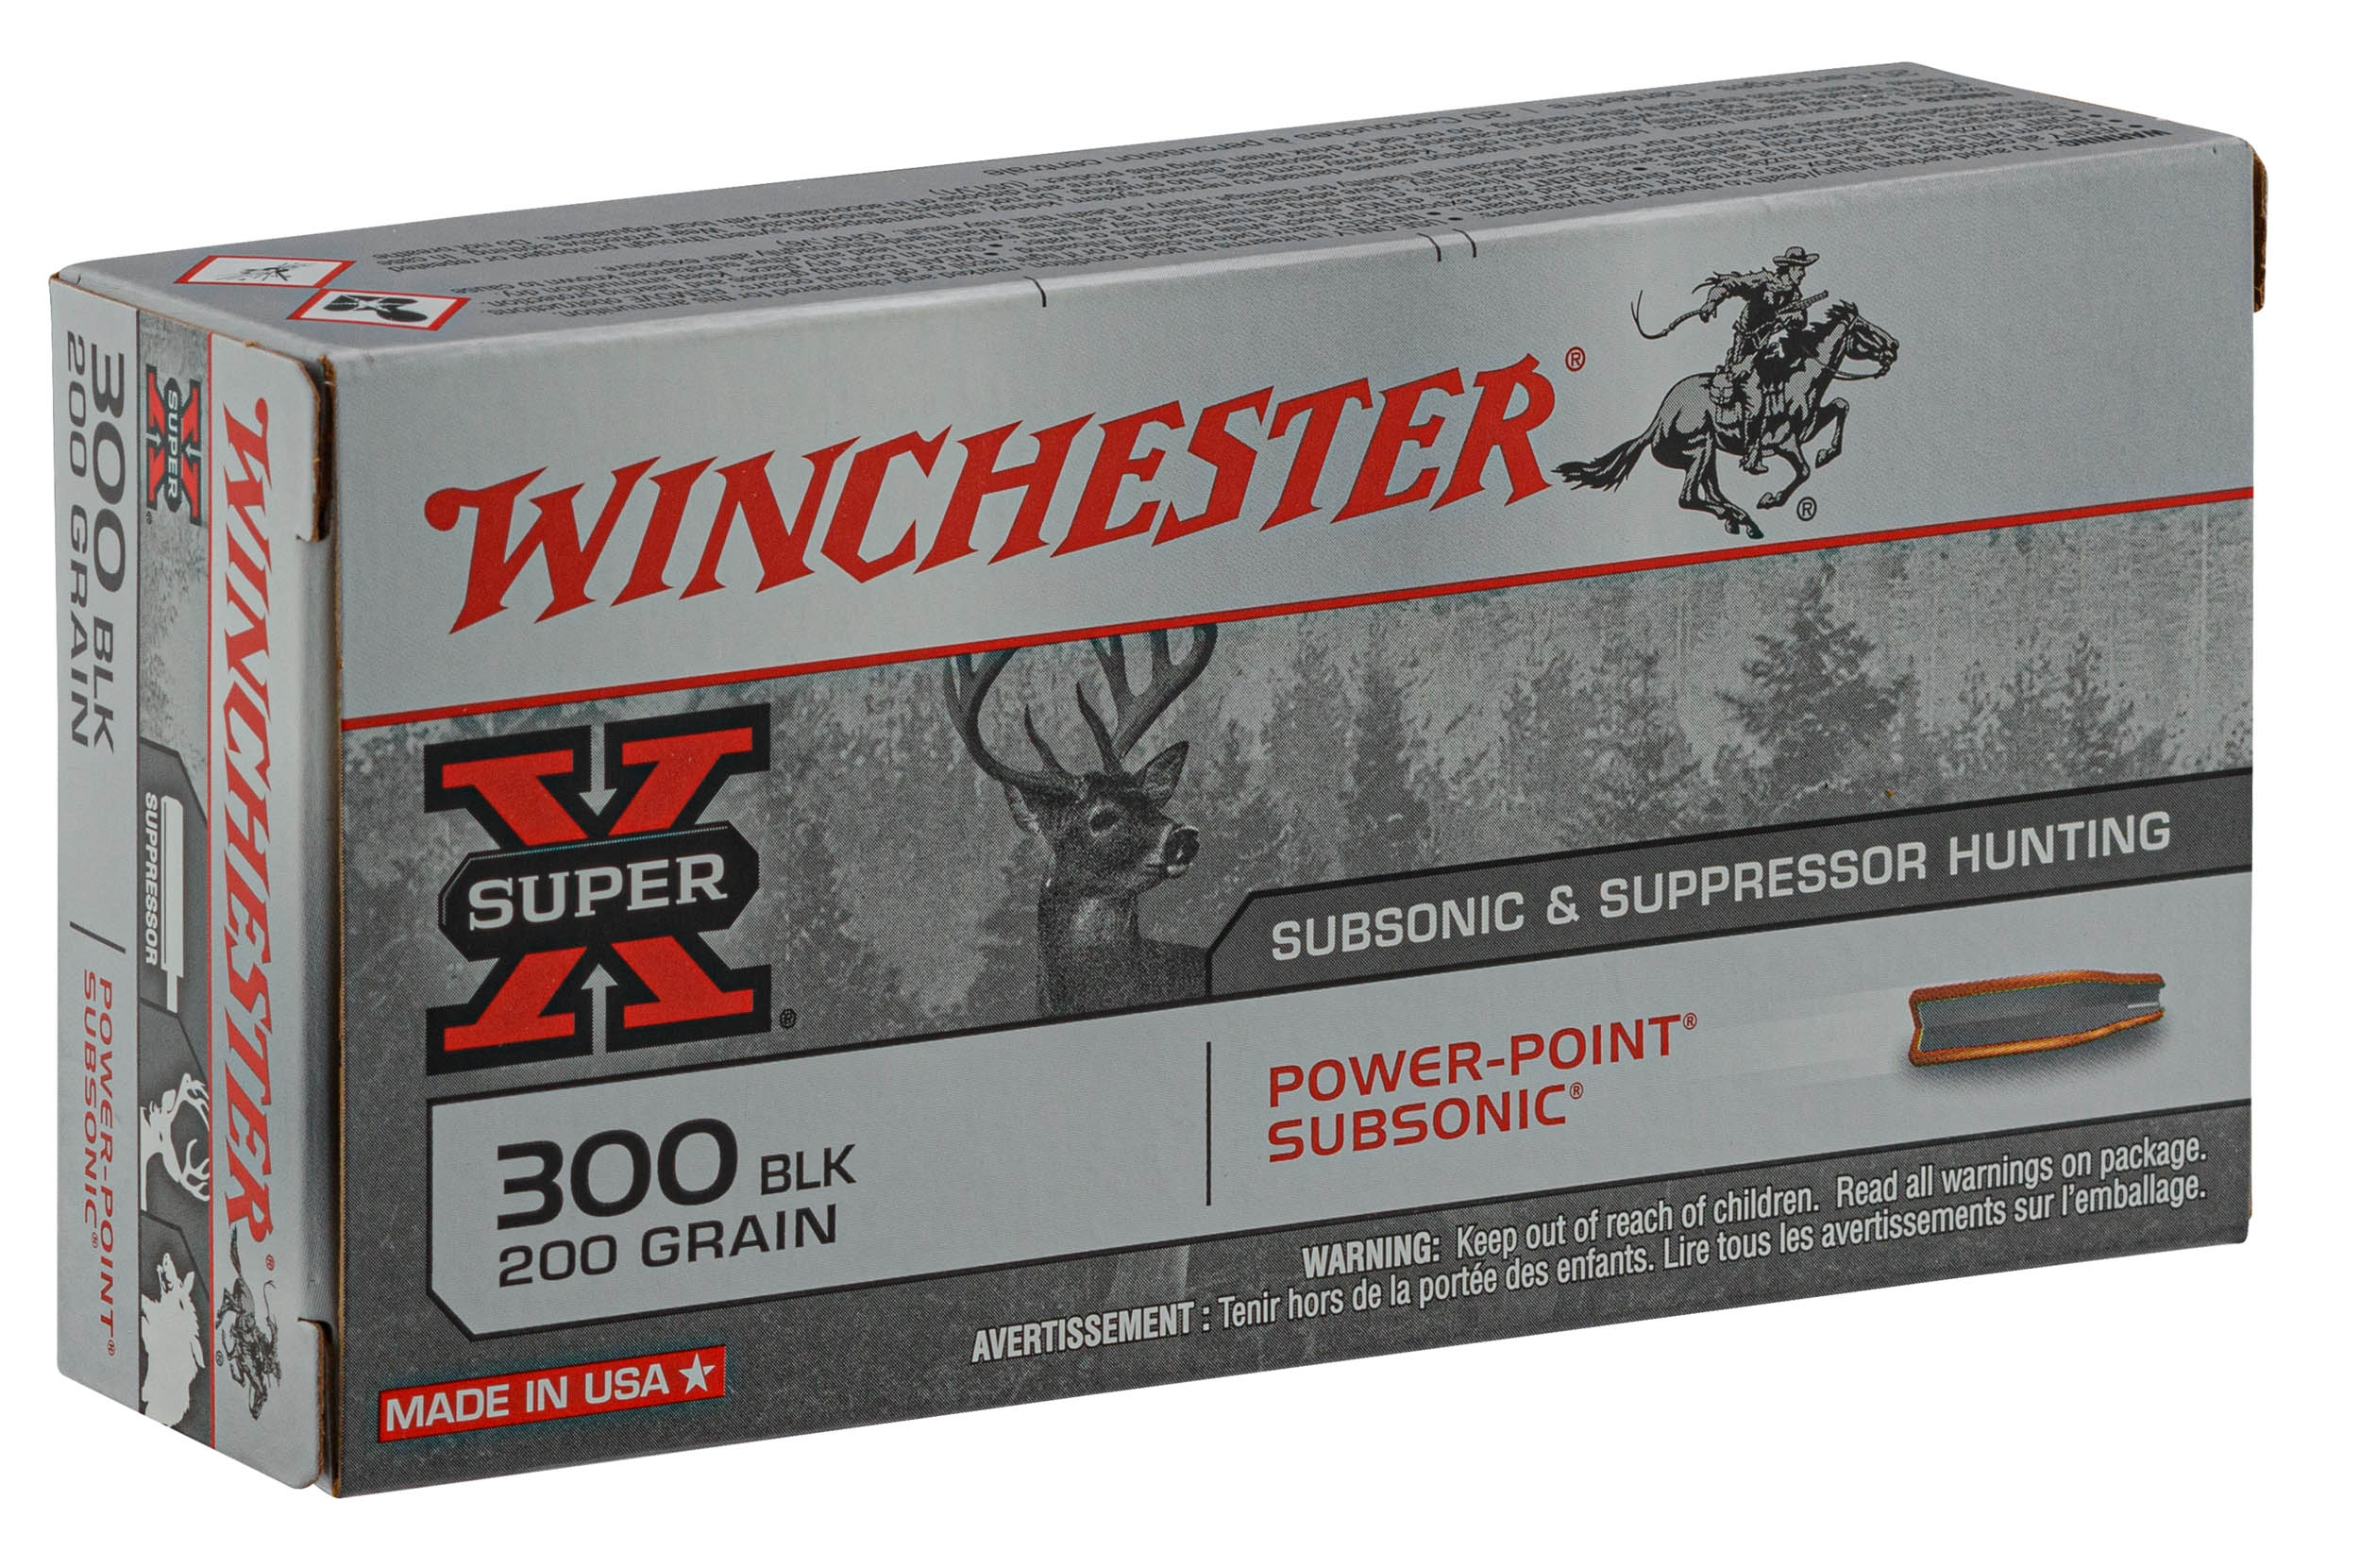 BW3022-04 Cartouche Winchester Cal. 300 Black Out Subsonique